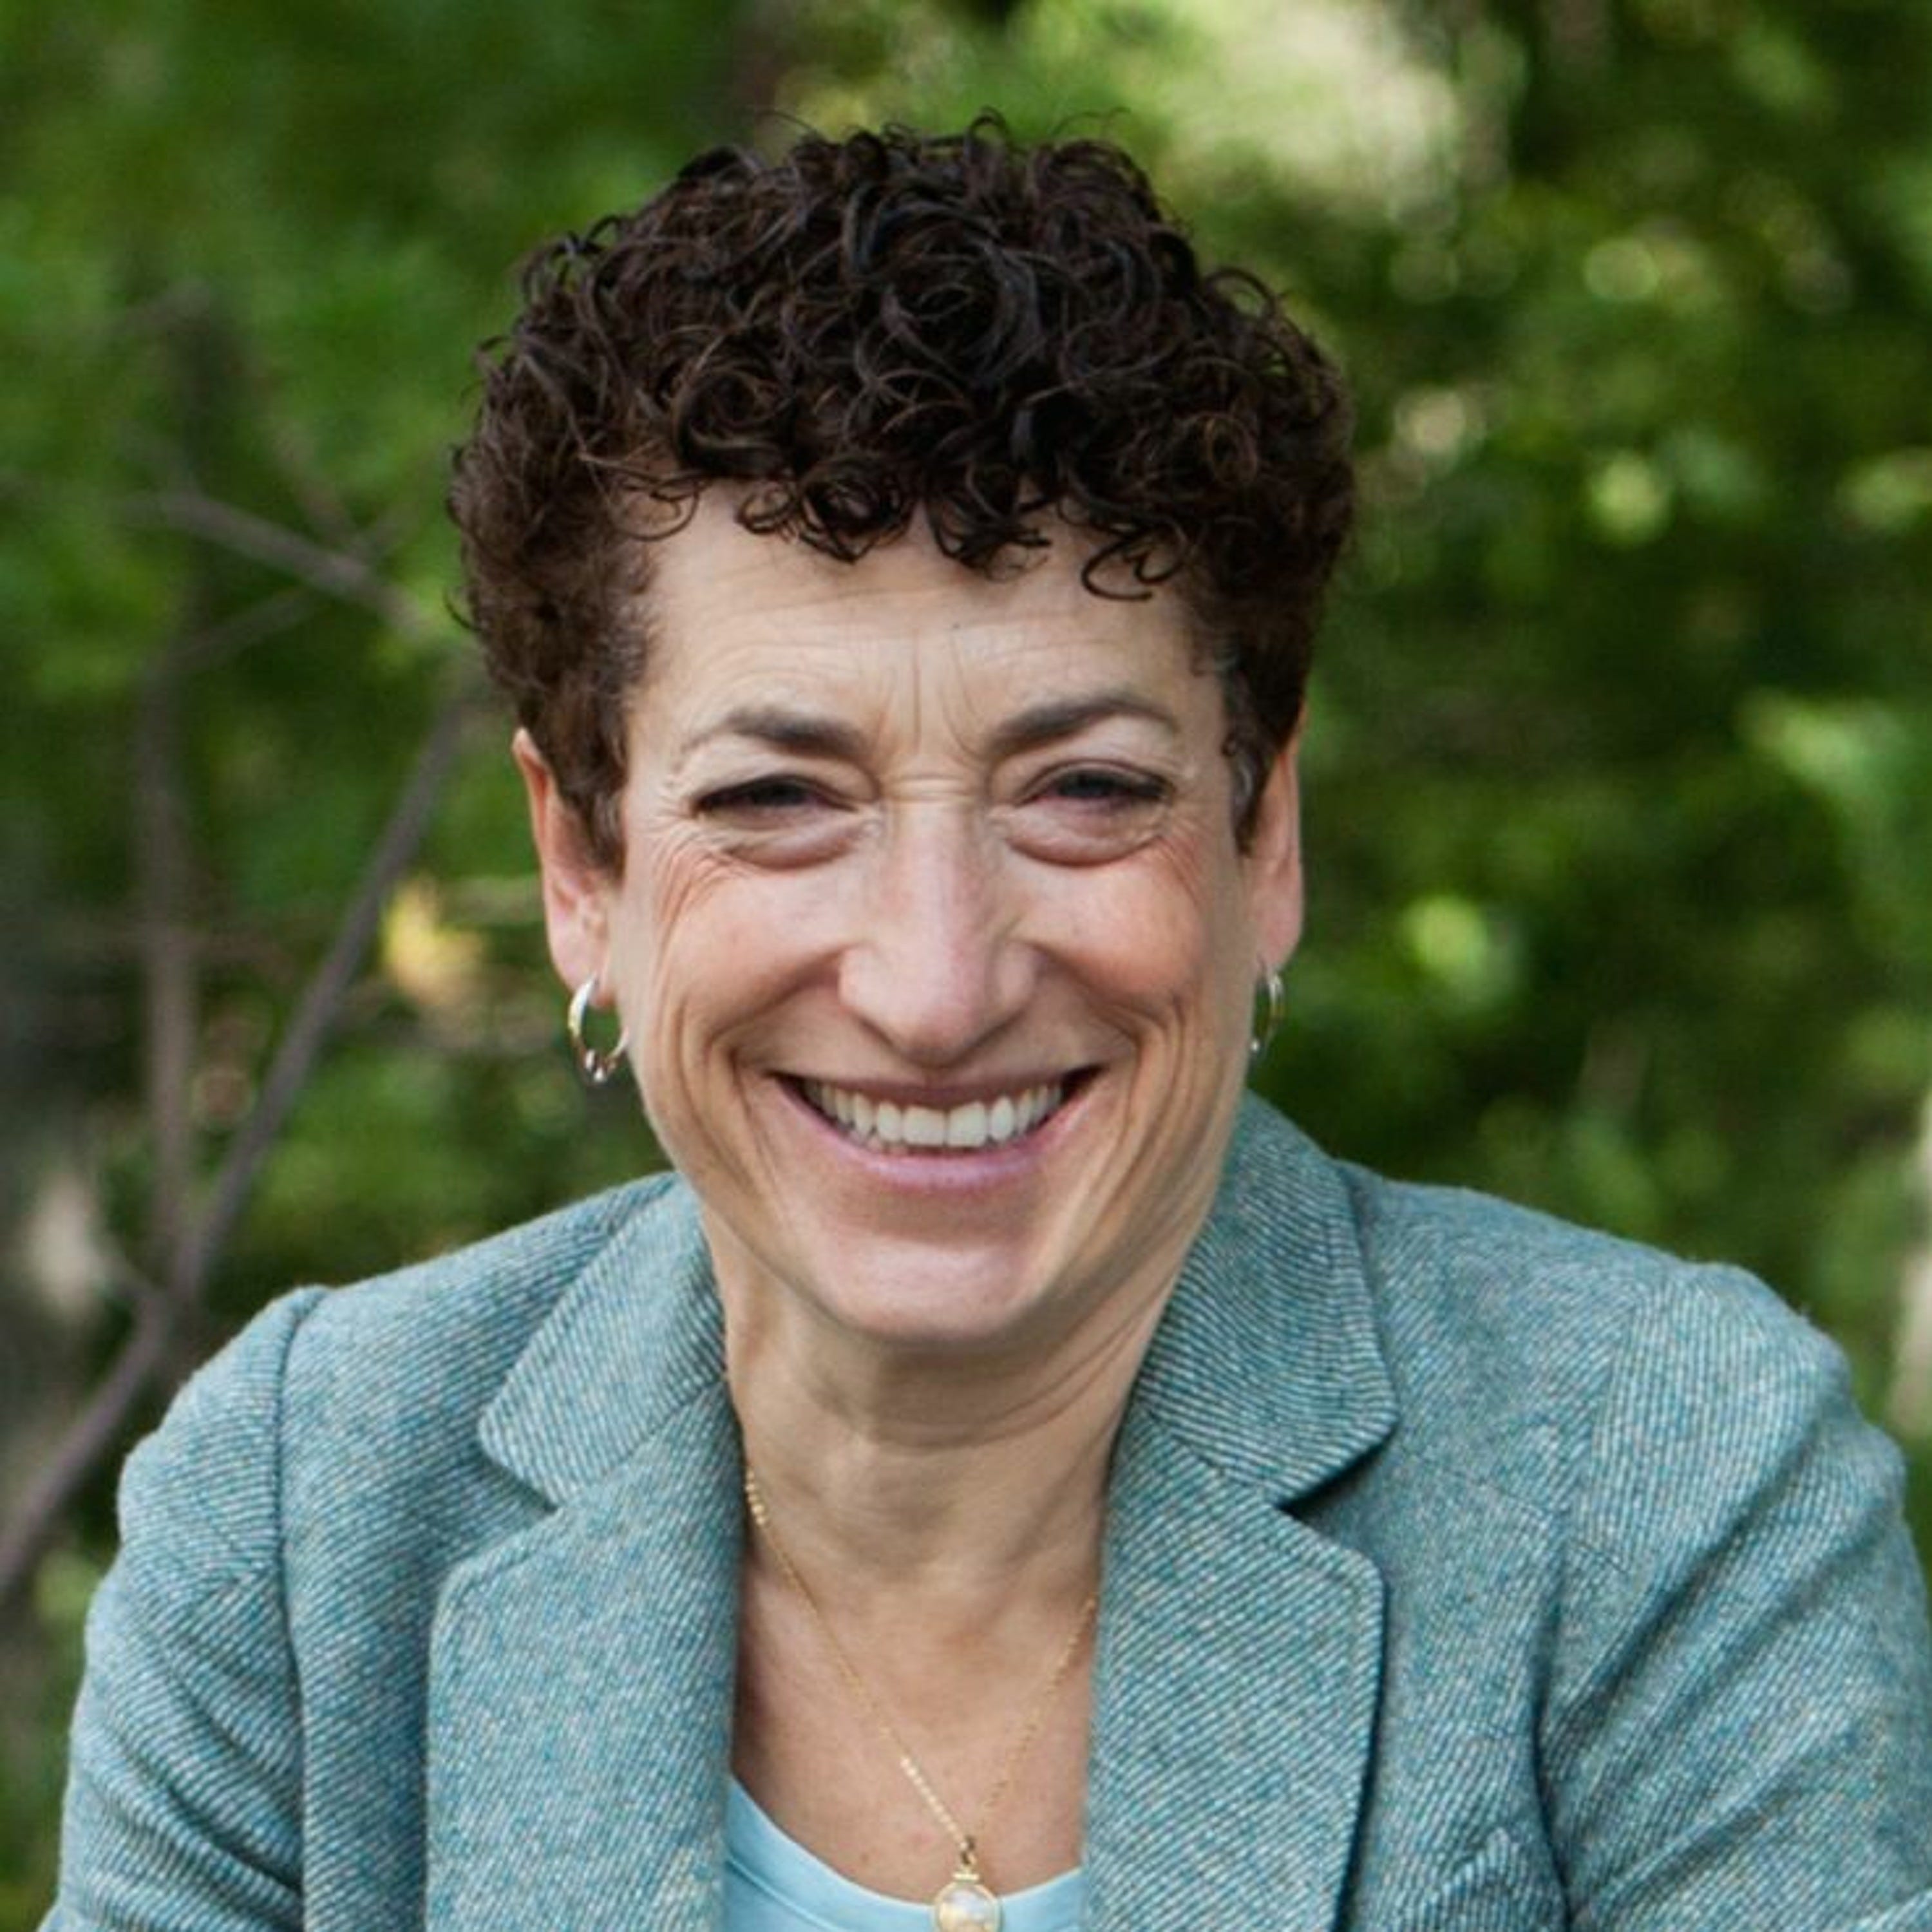 Dr. Naomi Oreskes on Why We Should Trust Science